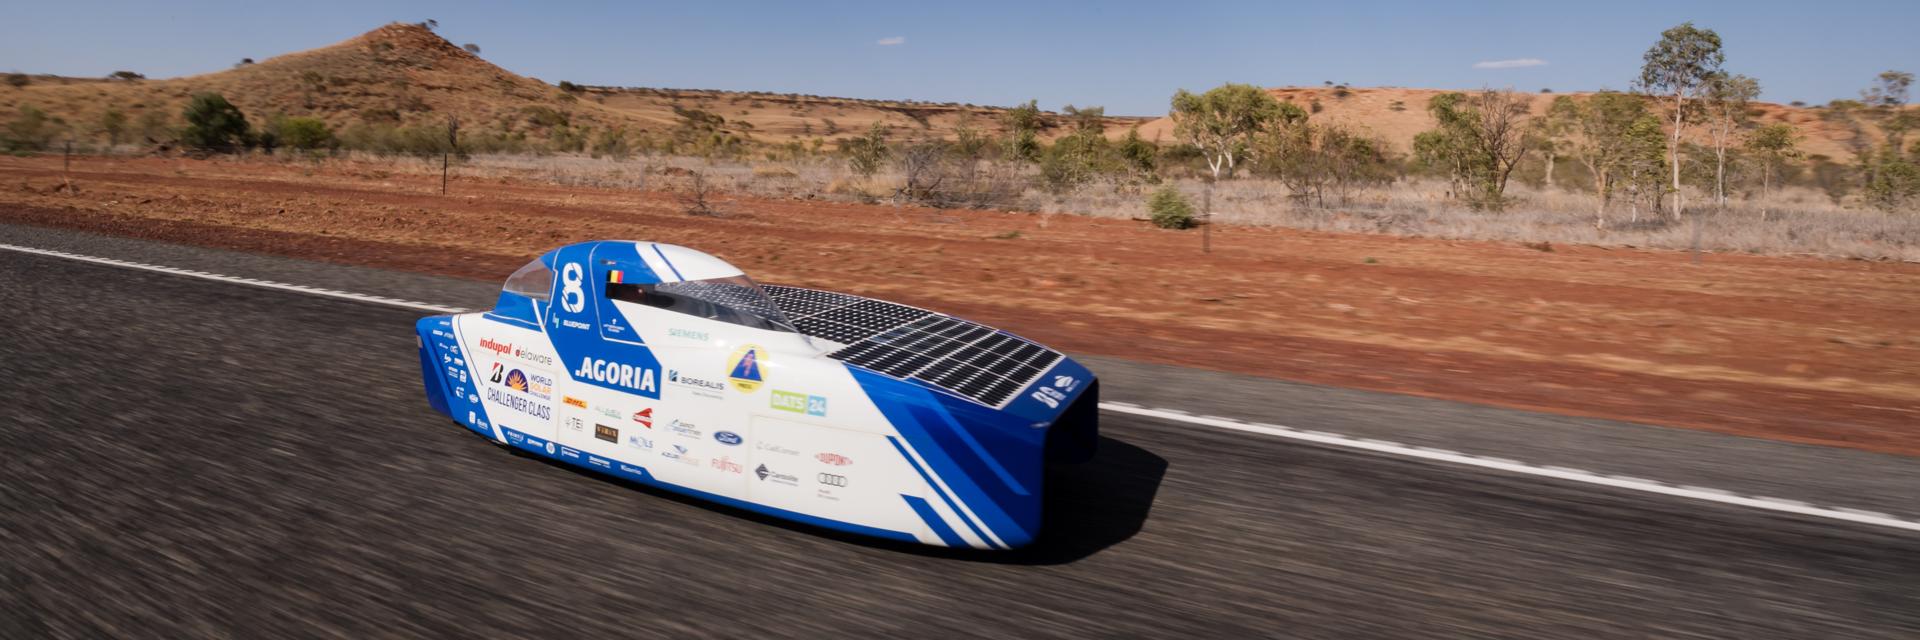 Solar car driving along a road in the Australian outback